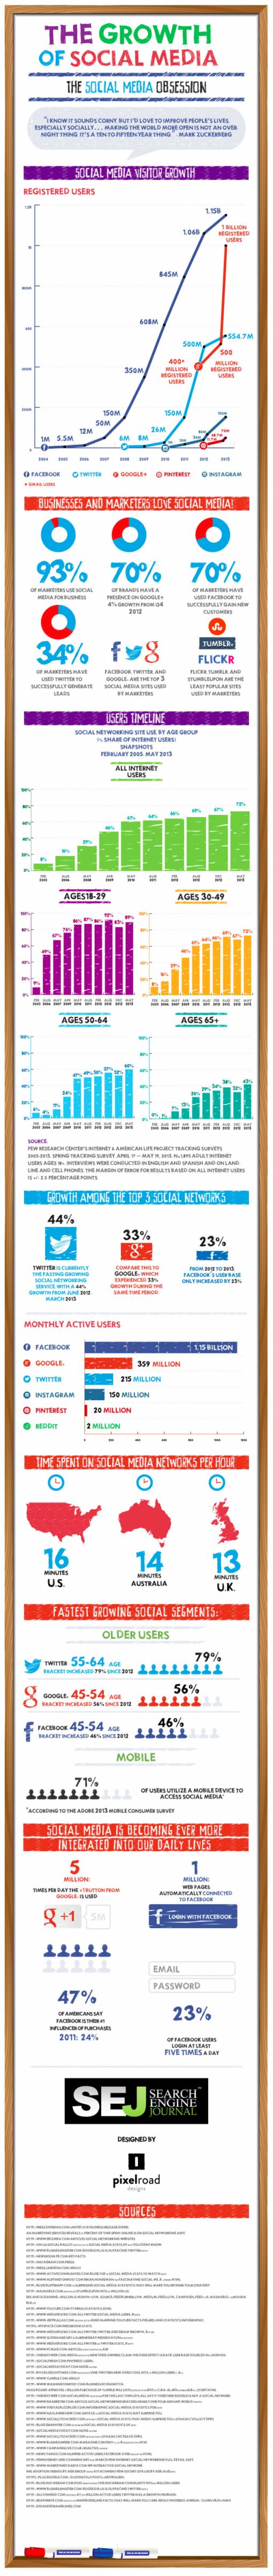 growth-of-social-media-infographic